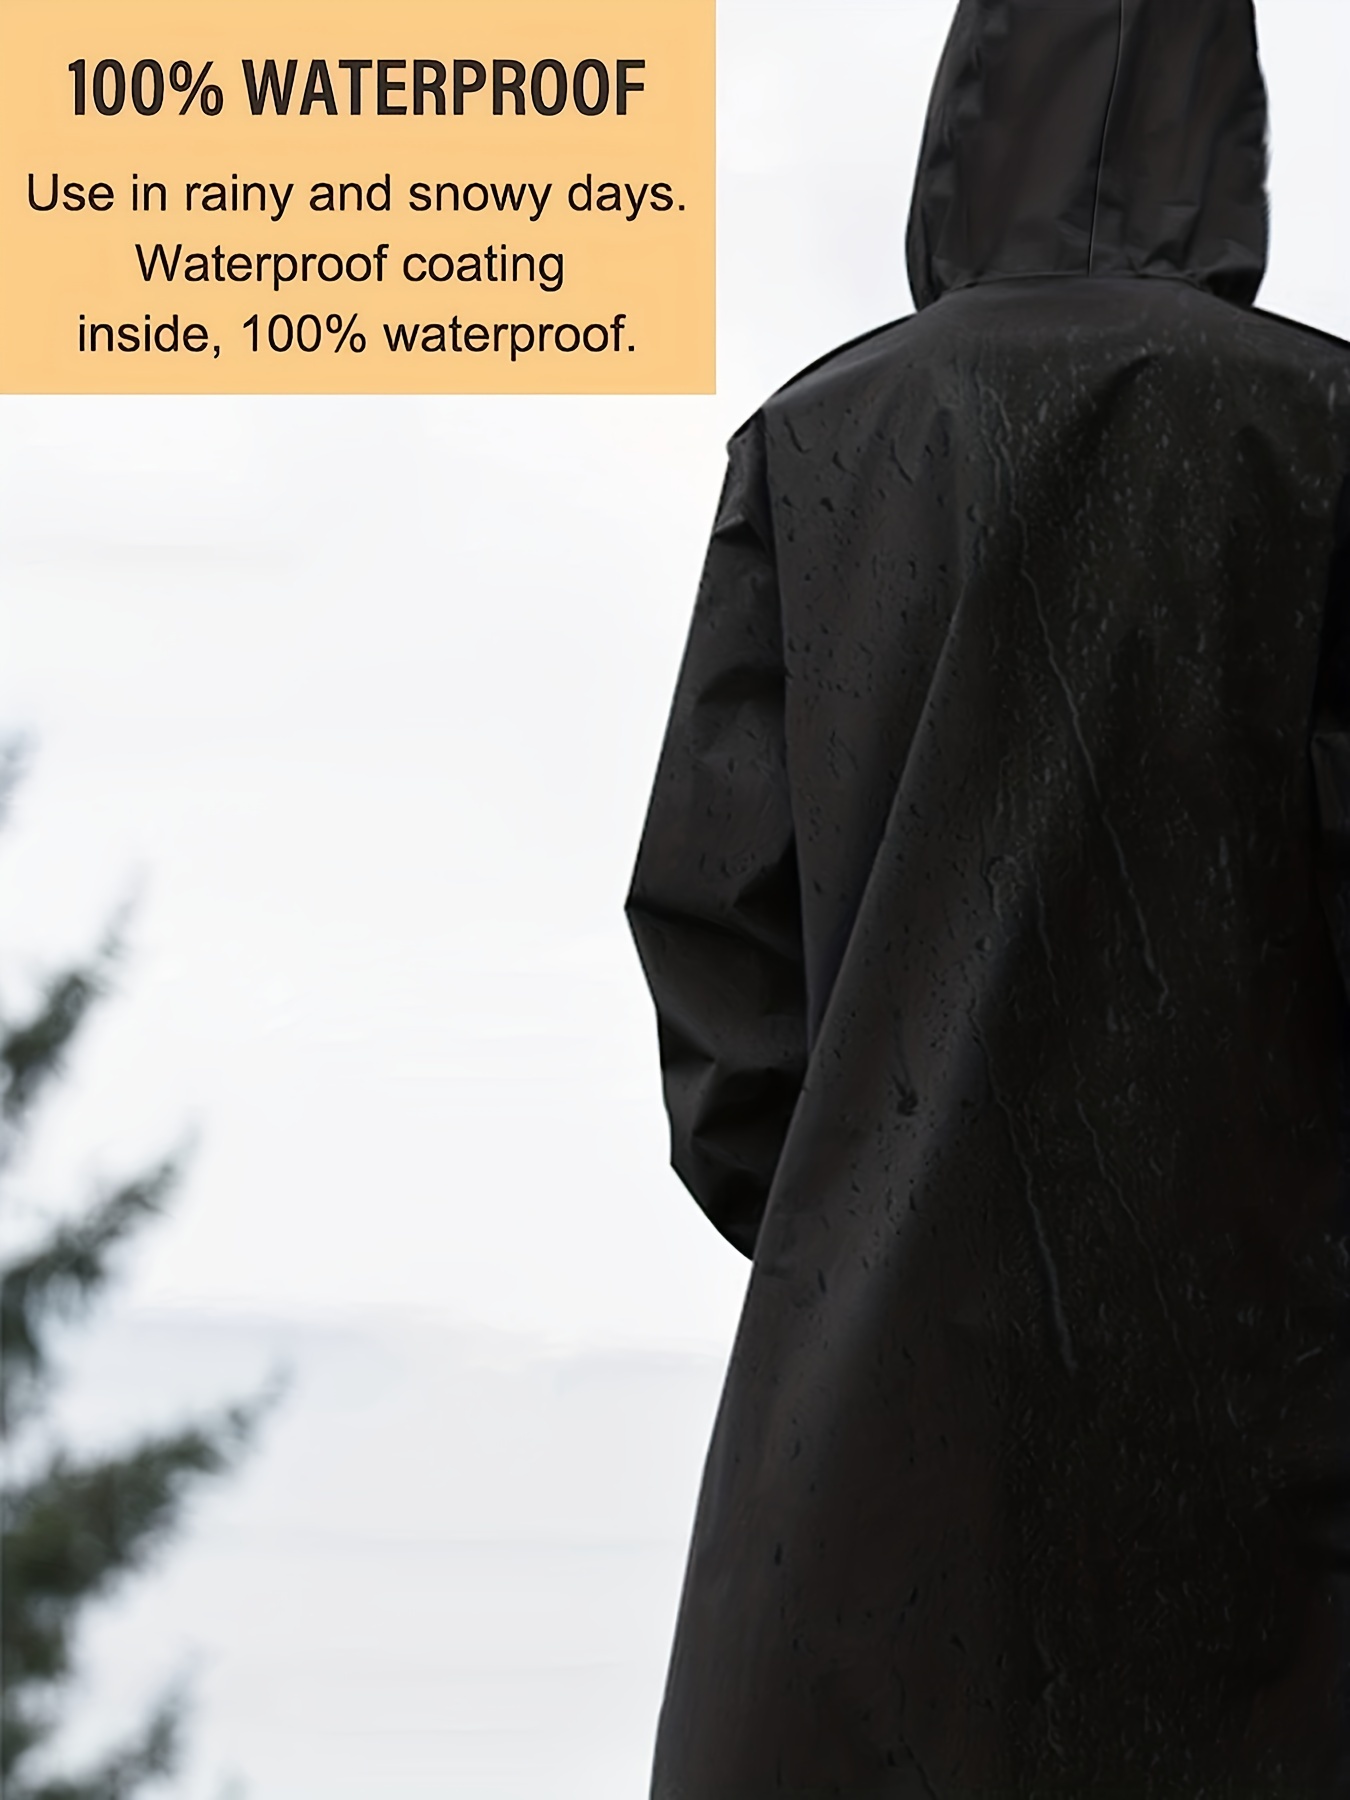 Poncho de lluvia impermeable para mujer, capa impermeable con